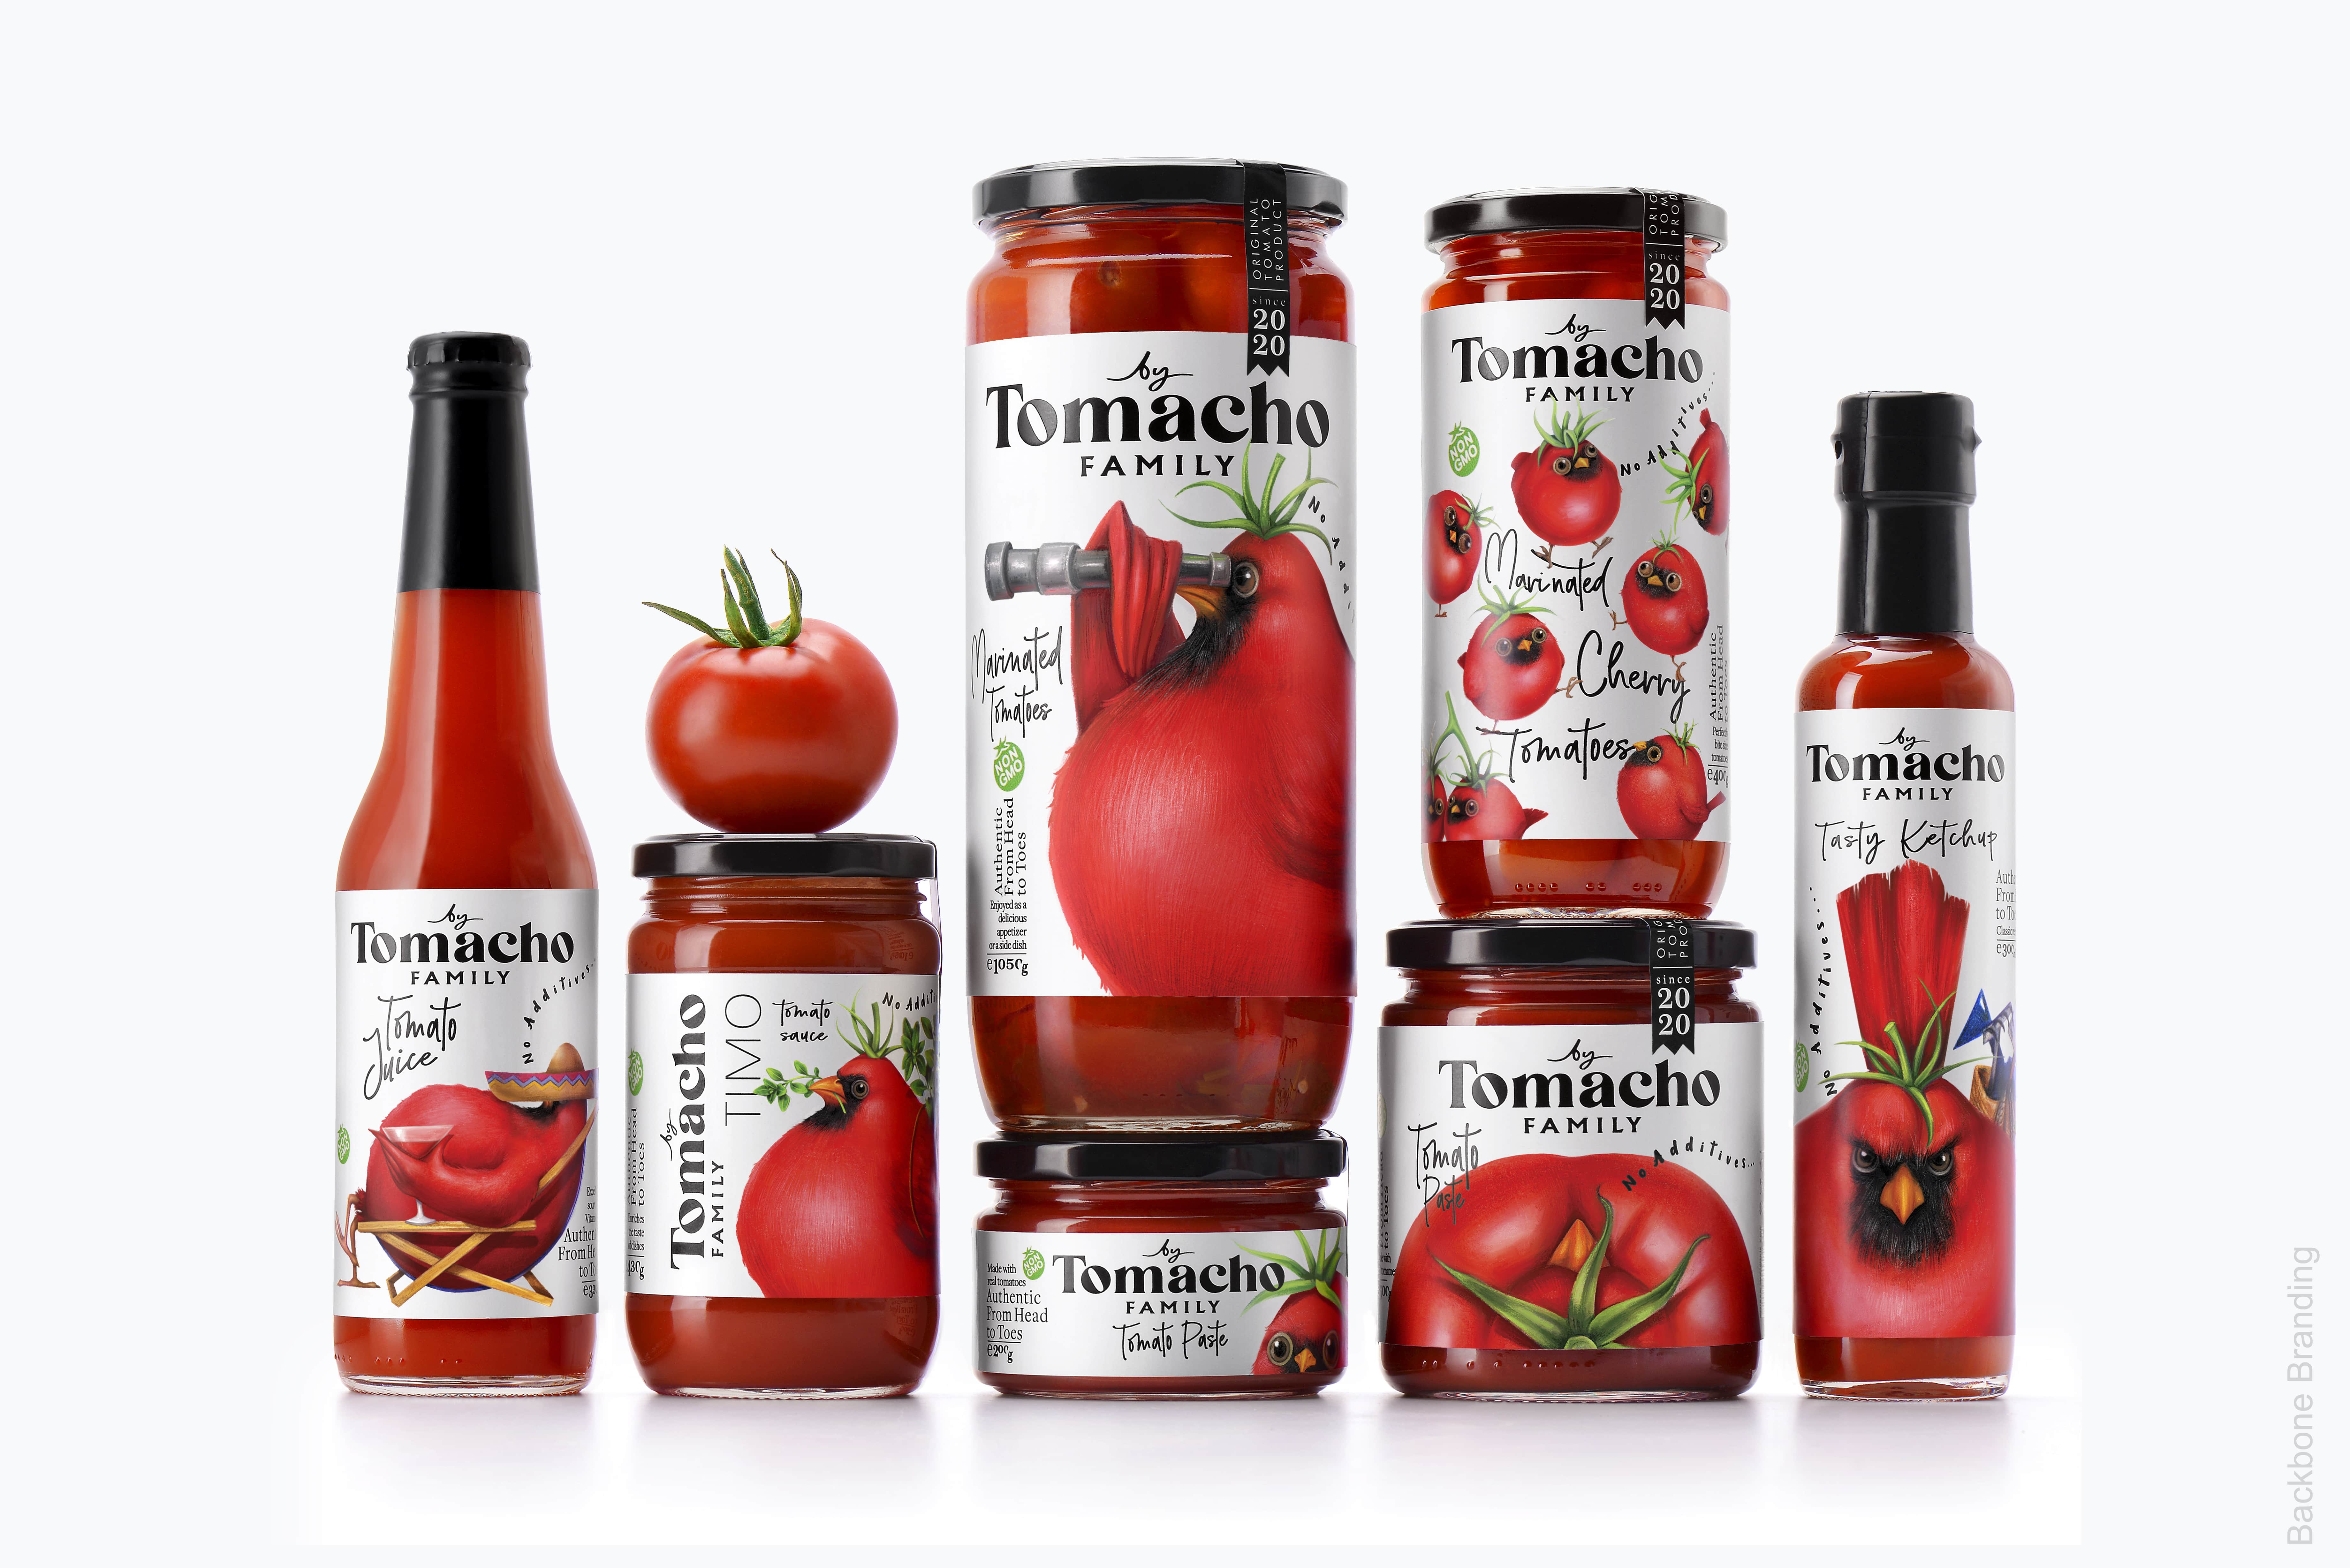 Backbone Branding Help the Tomacho Family of Tomatoes from Head to Toe